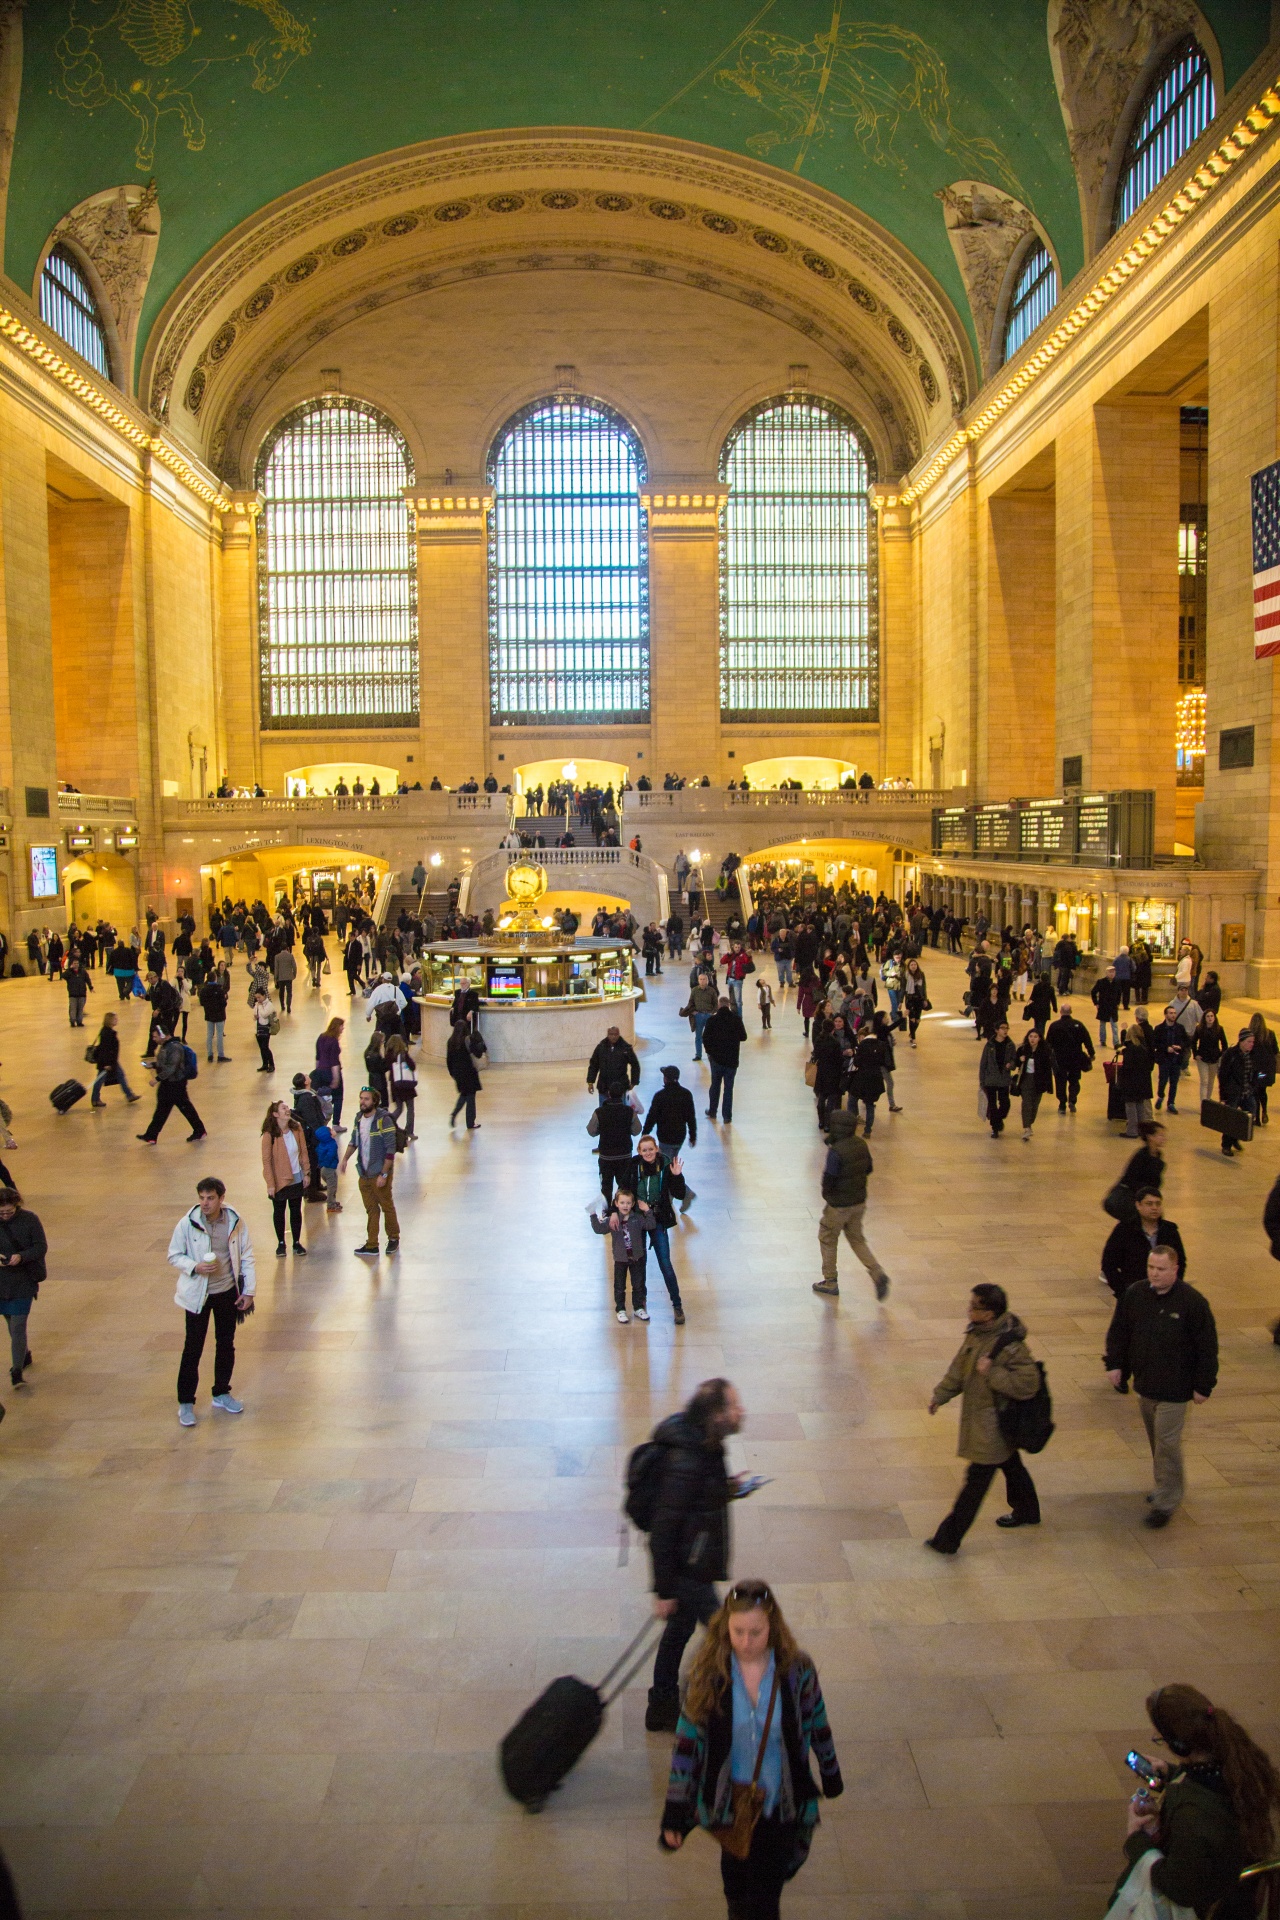 Grand Central station in New York. It is the largest train station in the world by number of platforms: 44, with 67 tracks